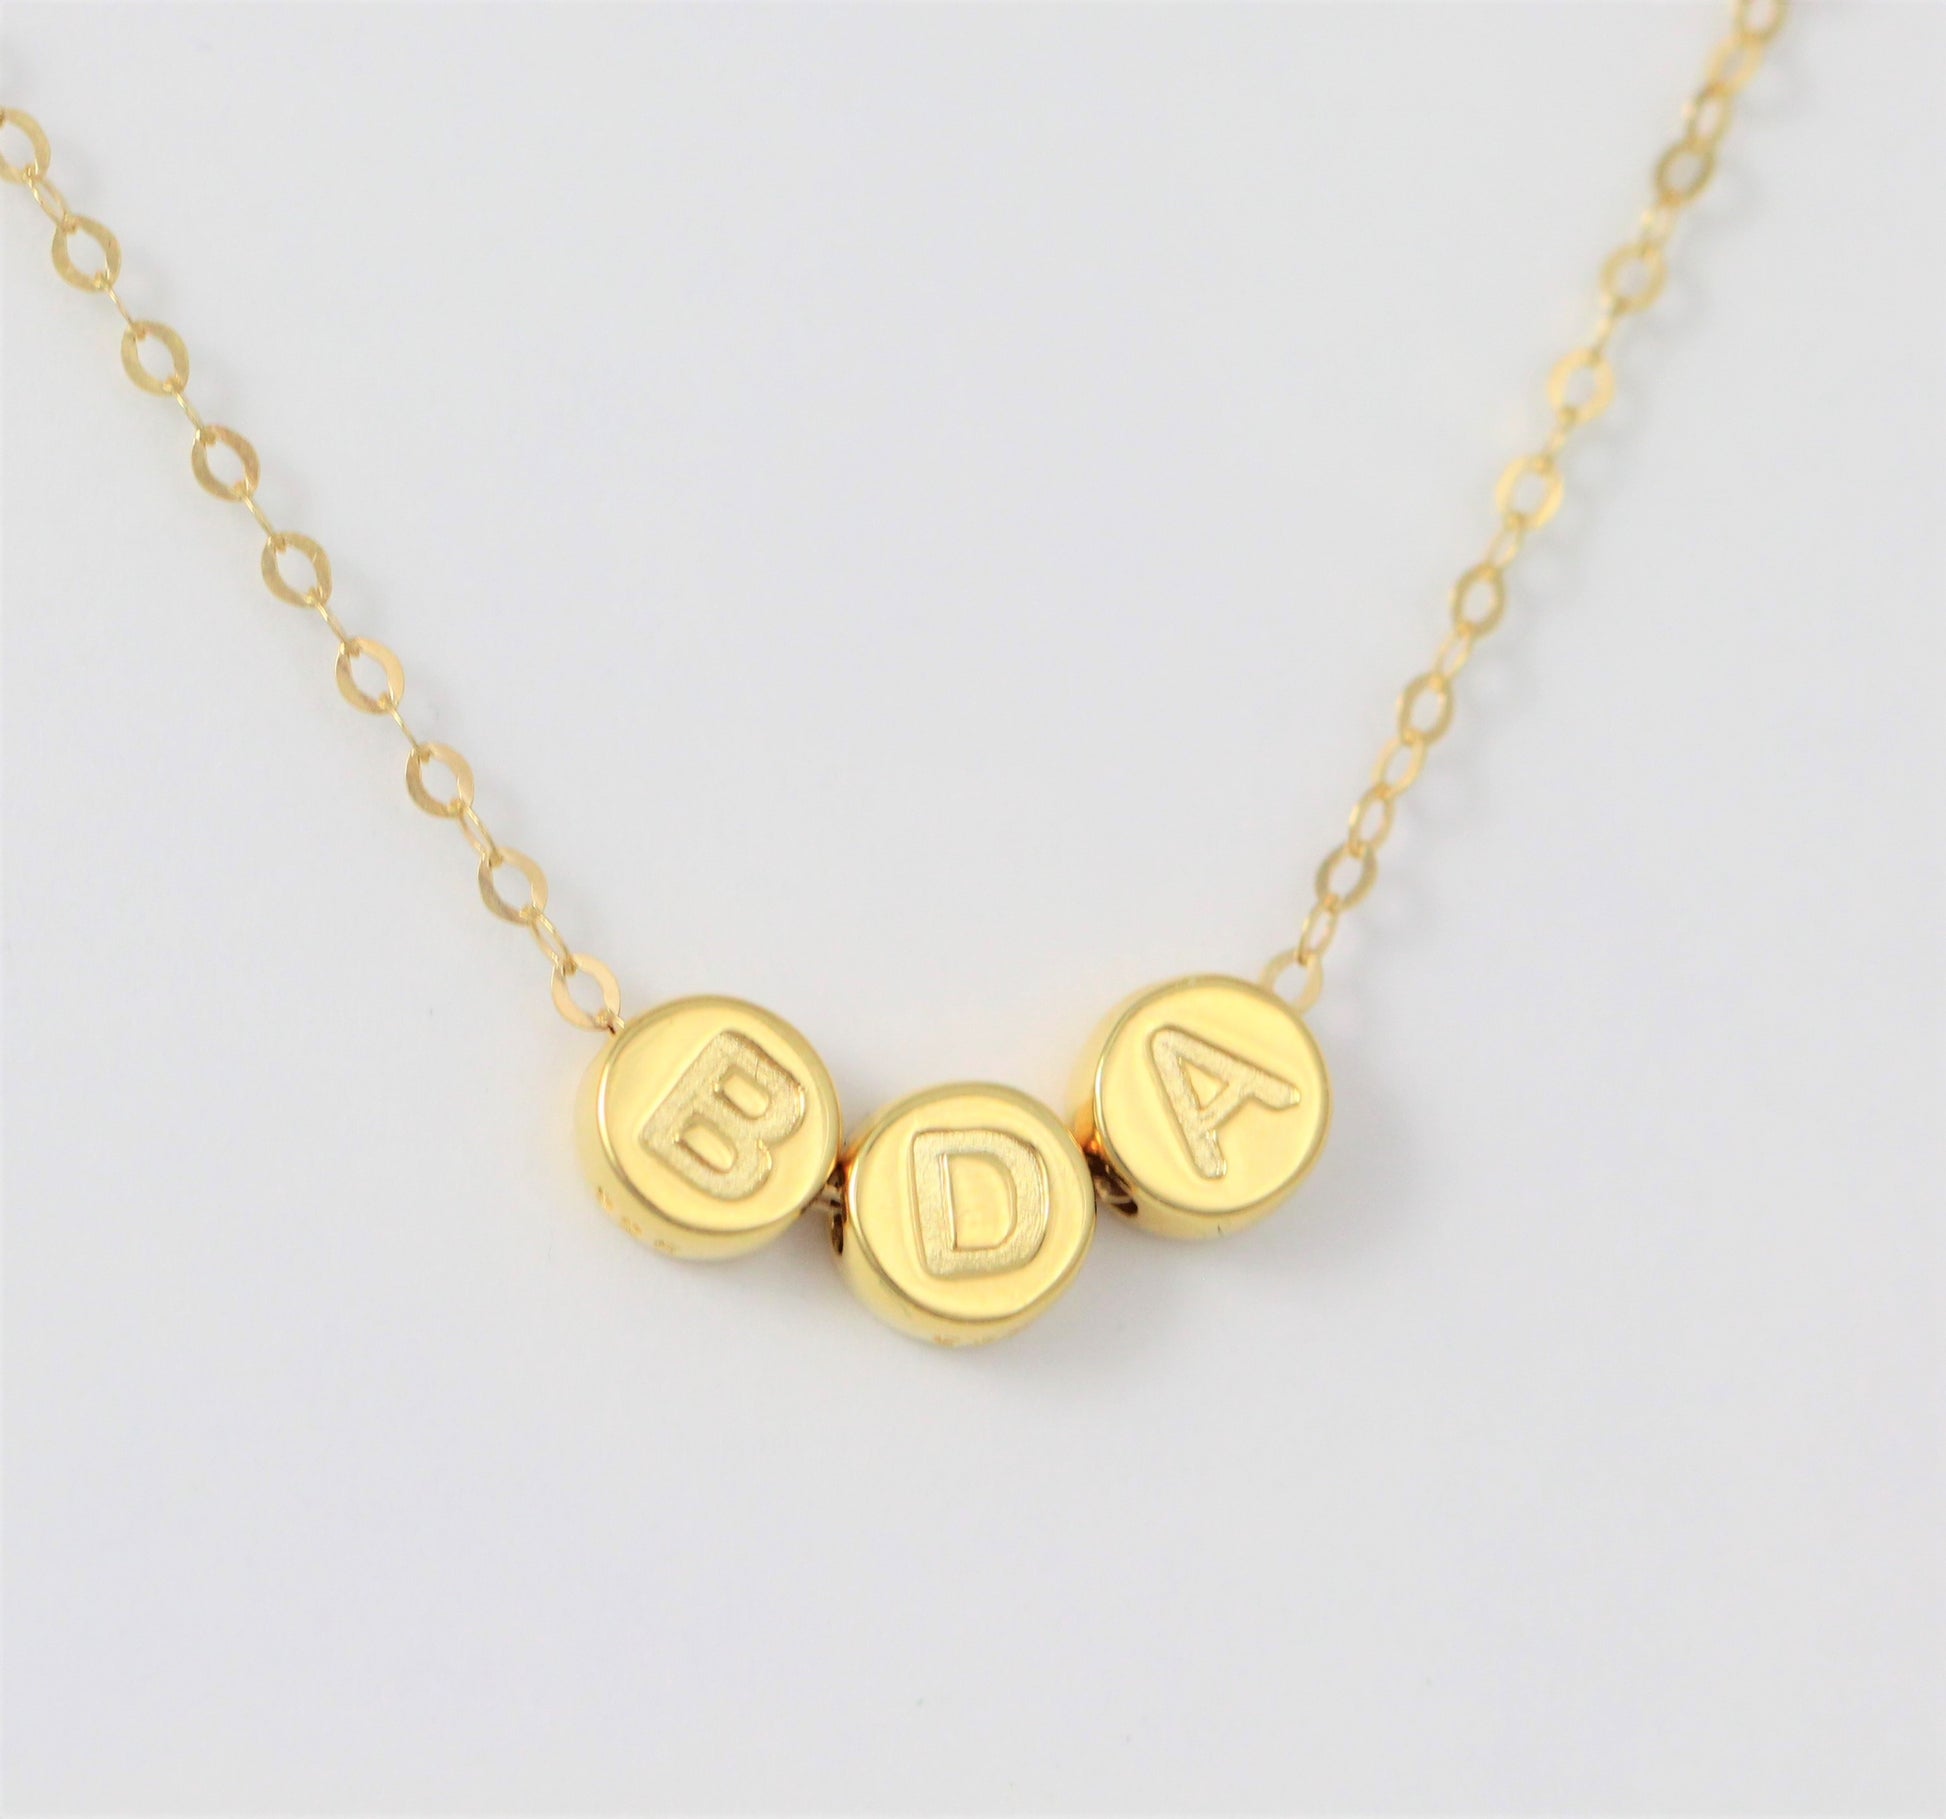 Mothers Necklace, Gold Personalized Initial Jewelry